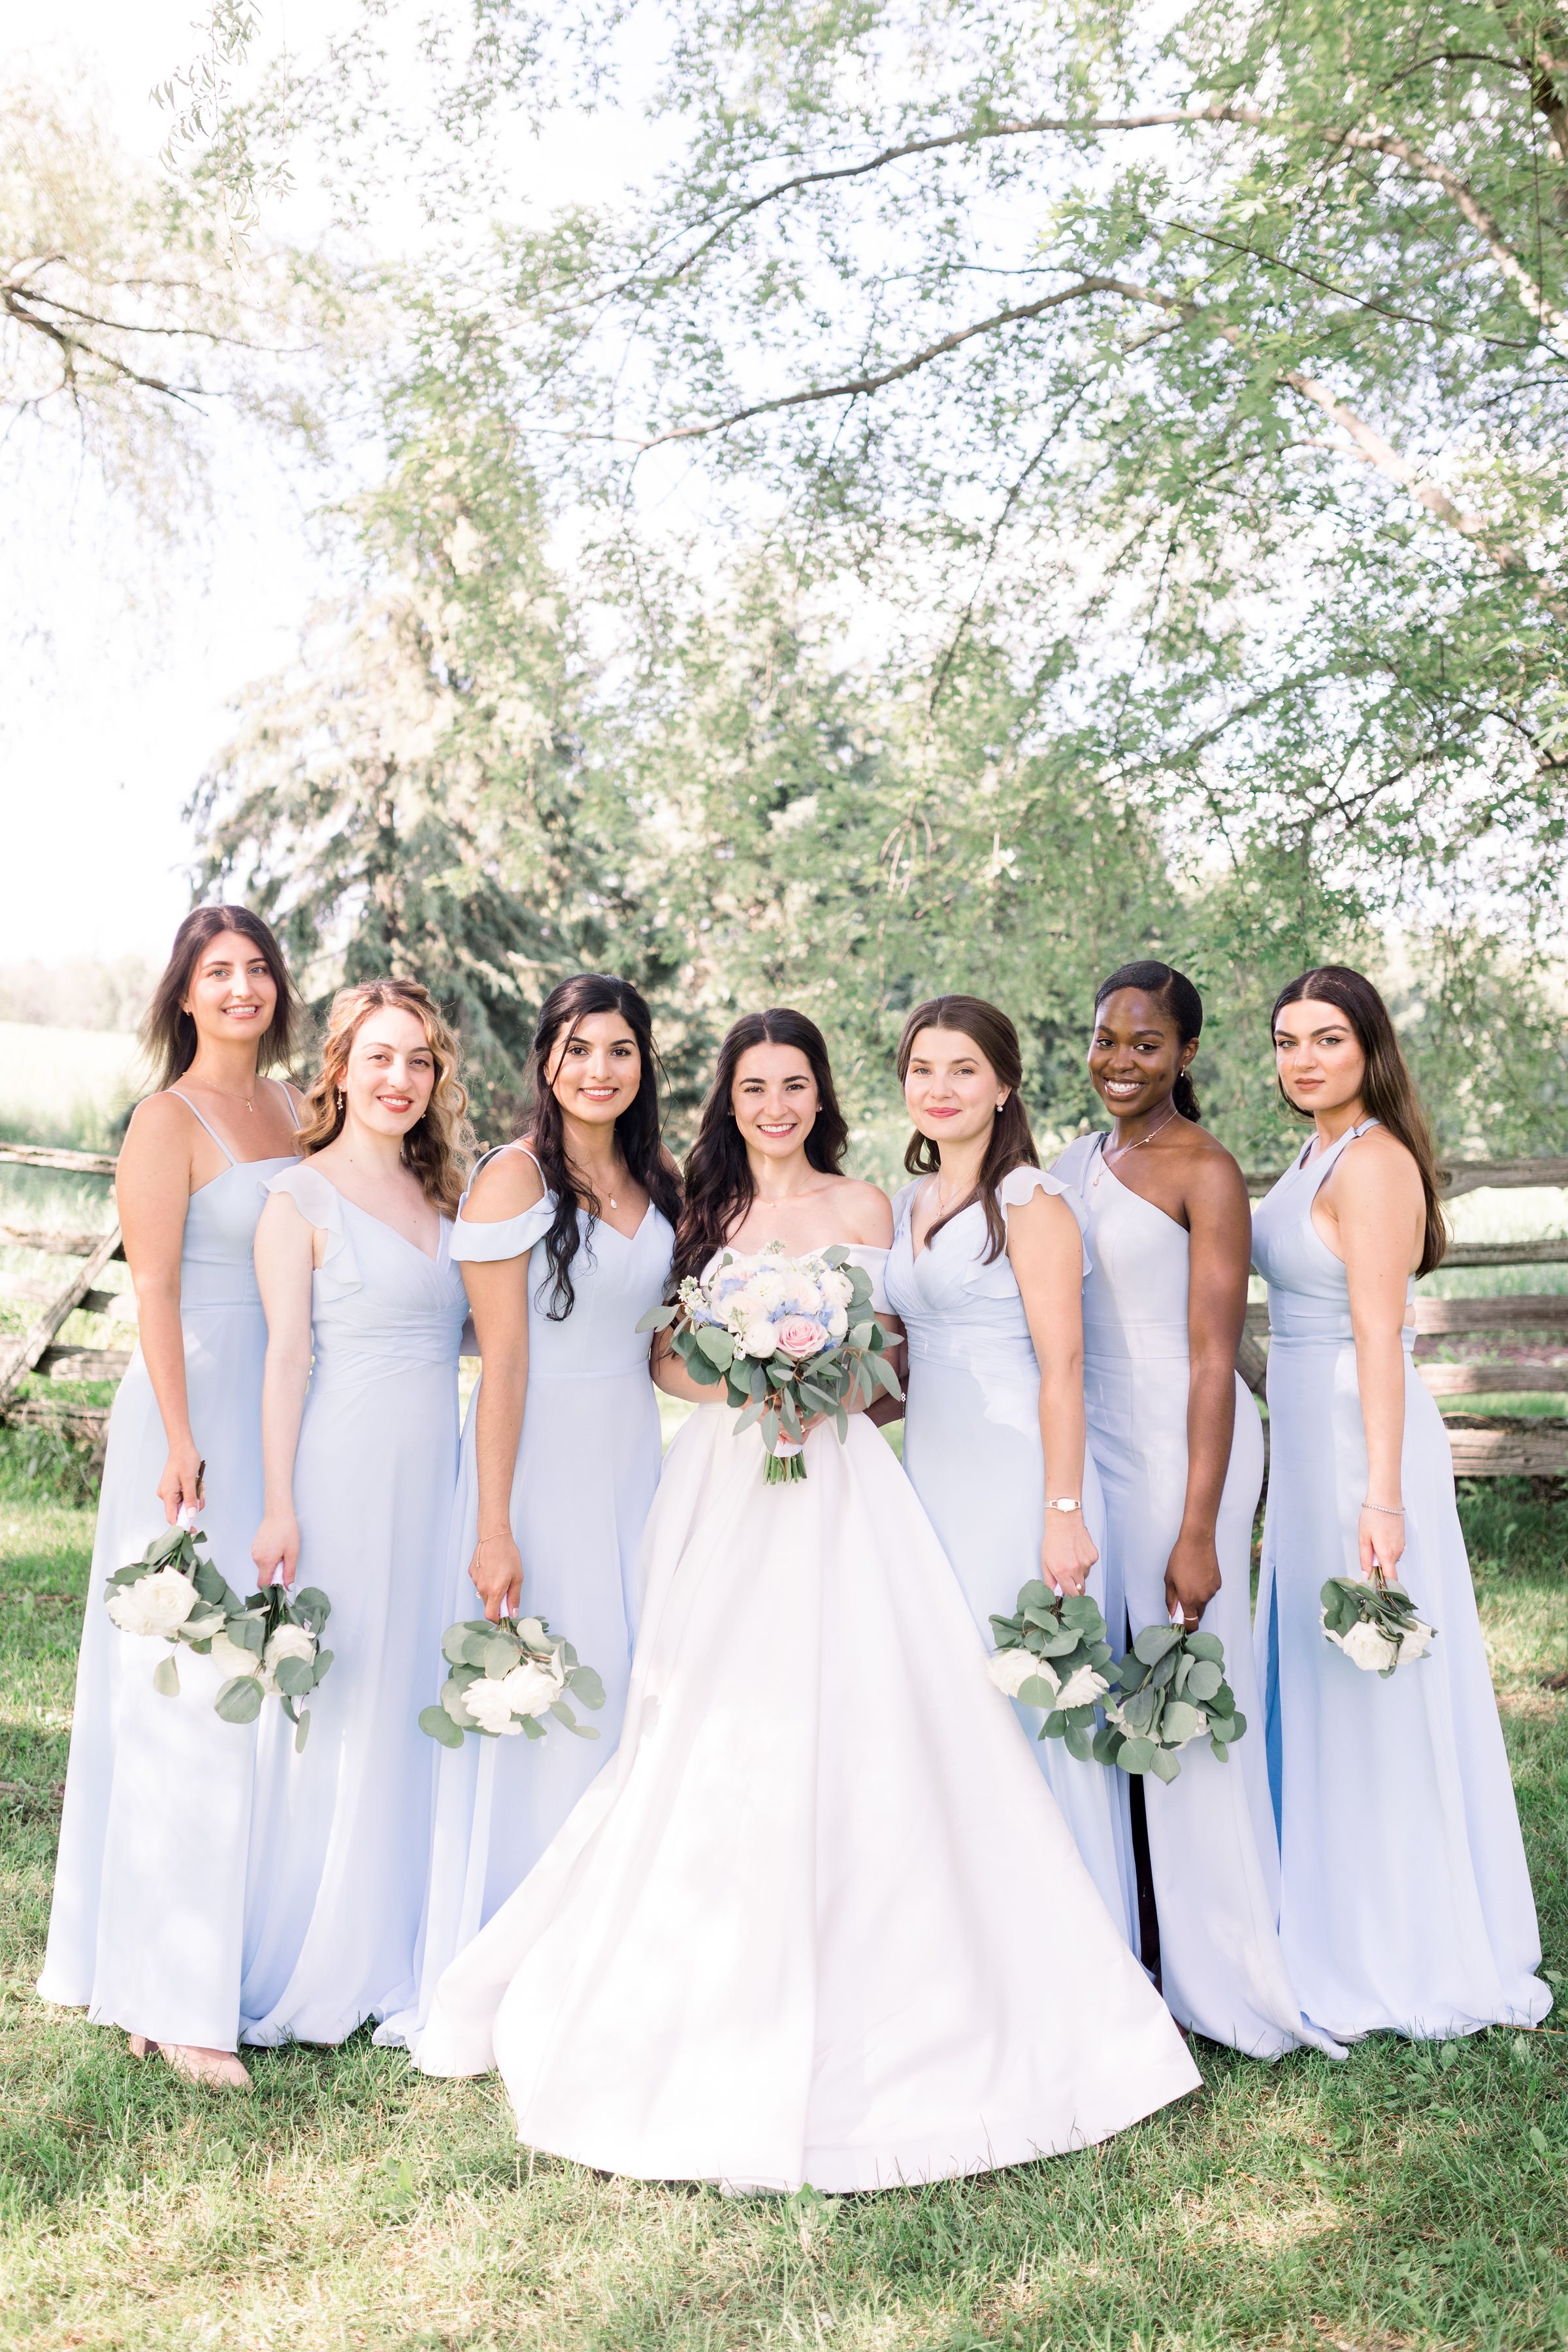  Bridesmaids in light blue dresses pose next to the bride in Almonte by Chelsea Mason Photography. bridesmaids in blue #Chelseamasonphotography #Chelseamasonweddings #Onatarioweddings #EvermoreweddingsAlmonte #Ontarioweddingphotographers 